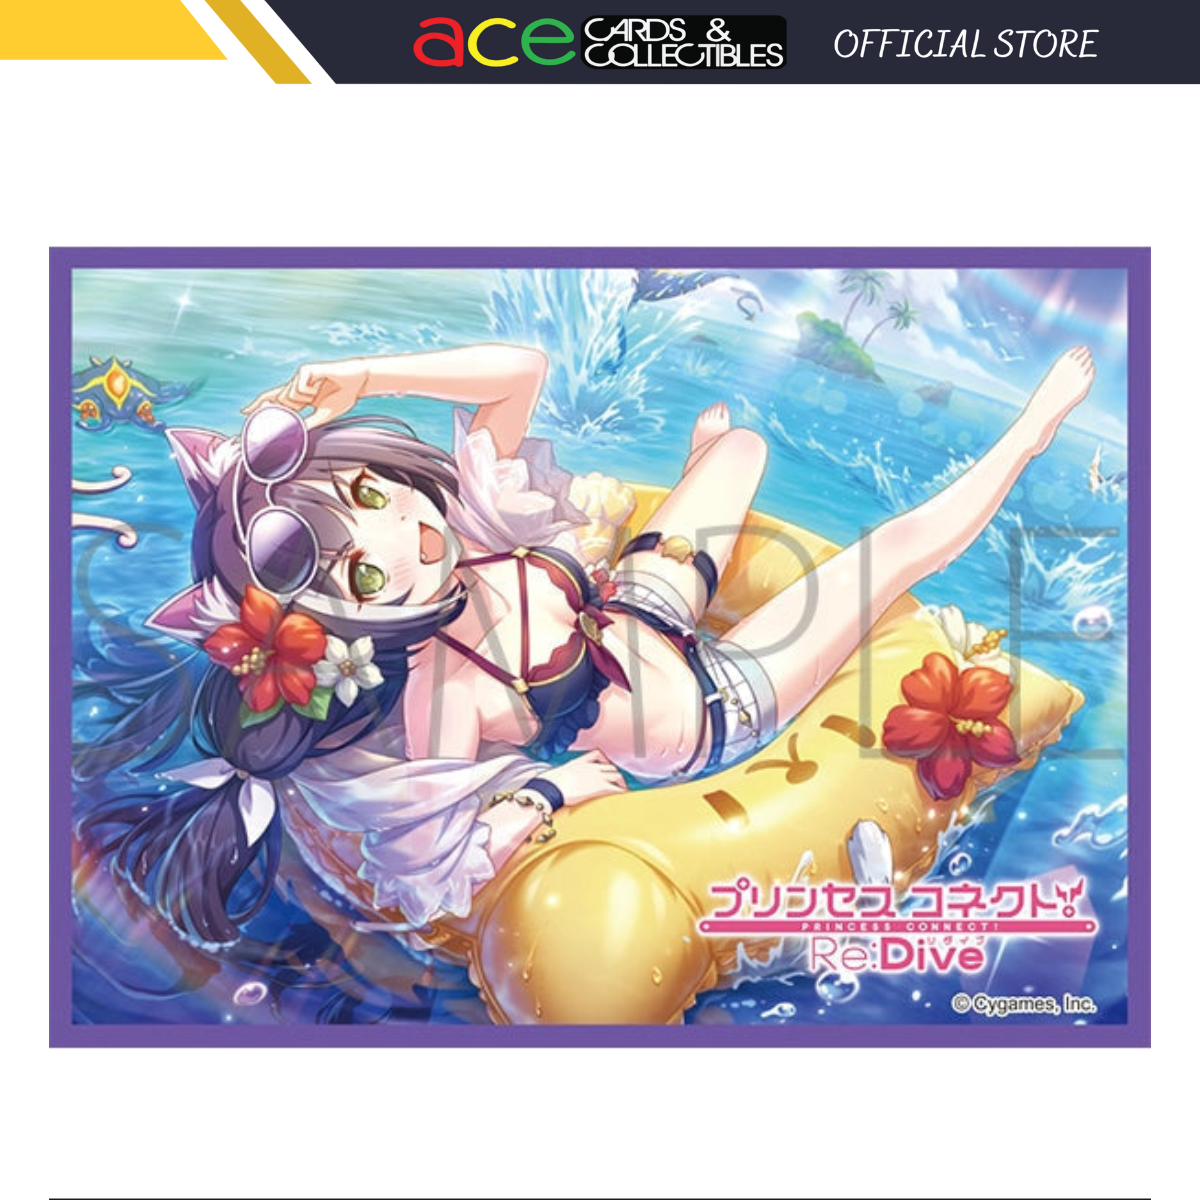 Movic Chara Sleeve Matte Series - Princess Connect! ReDive "Kyaru(Summer)" (MT1645)-Movic-Ace Cards & Collectibles